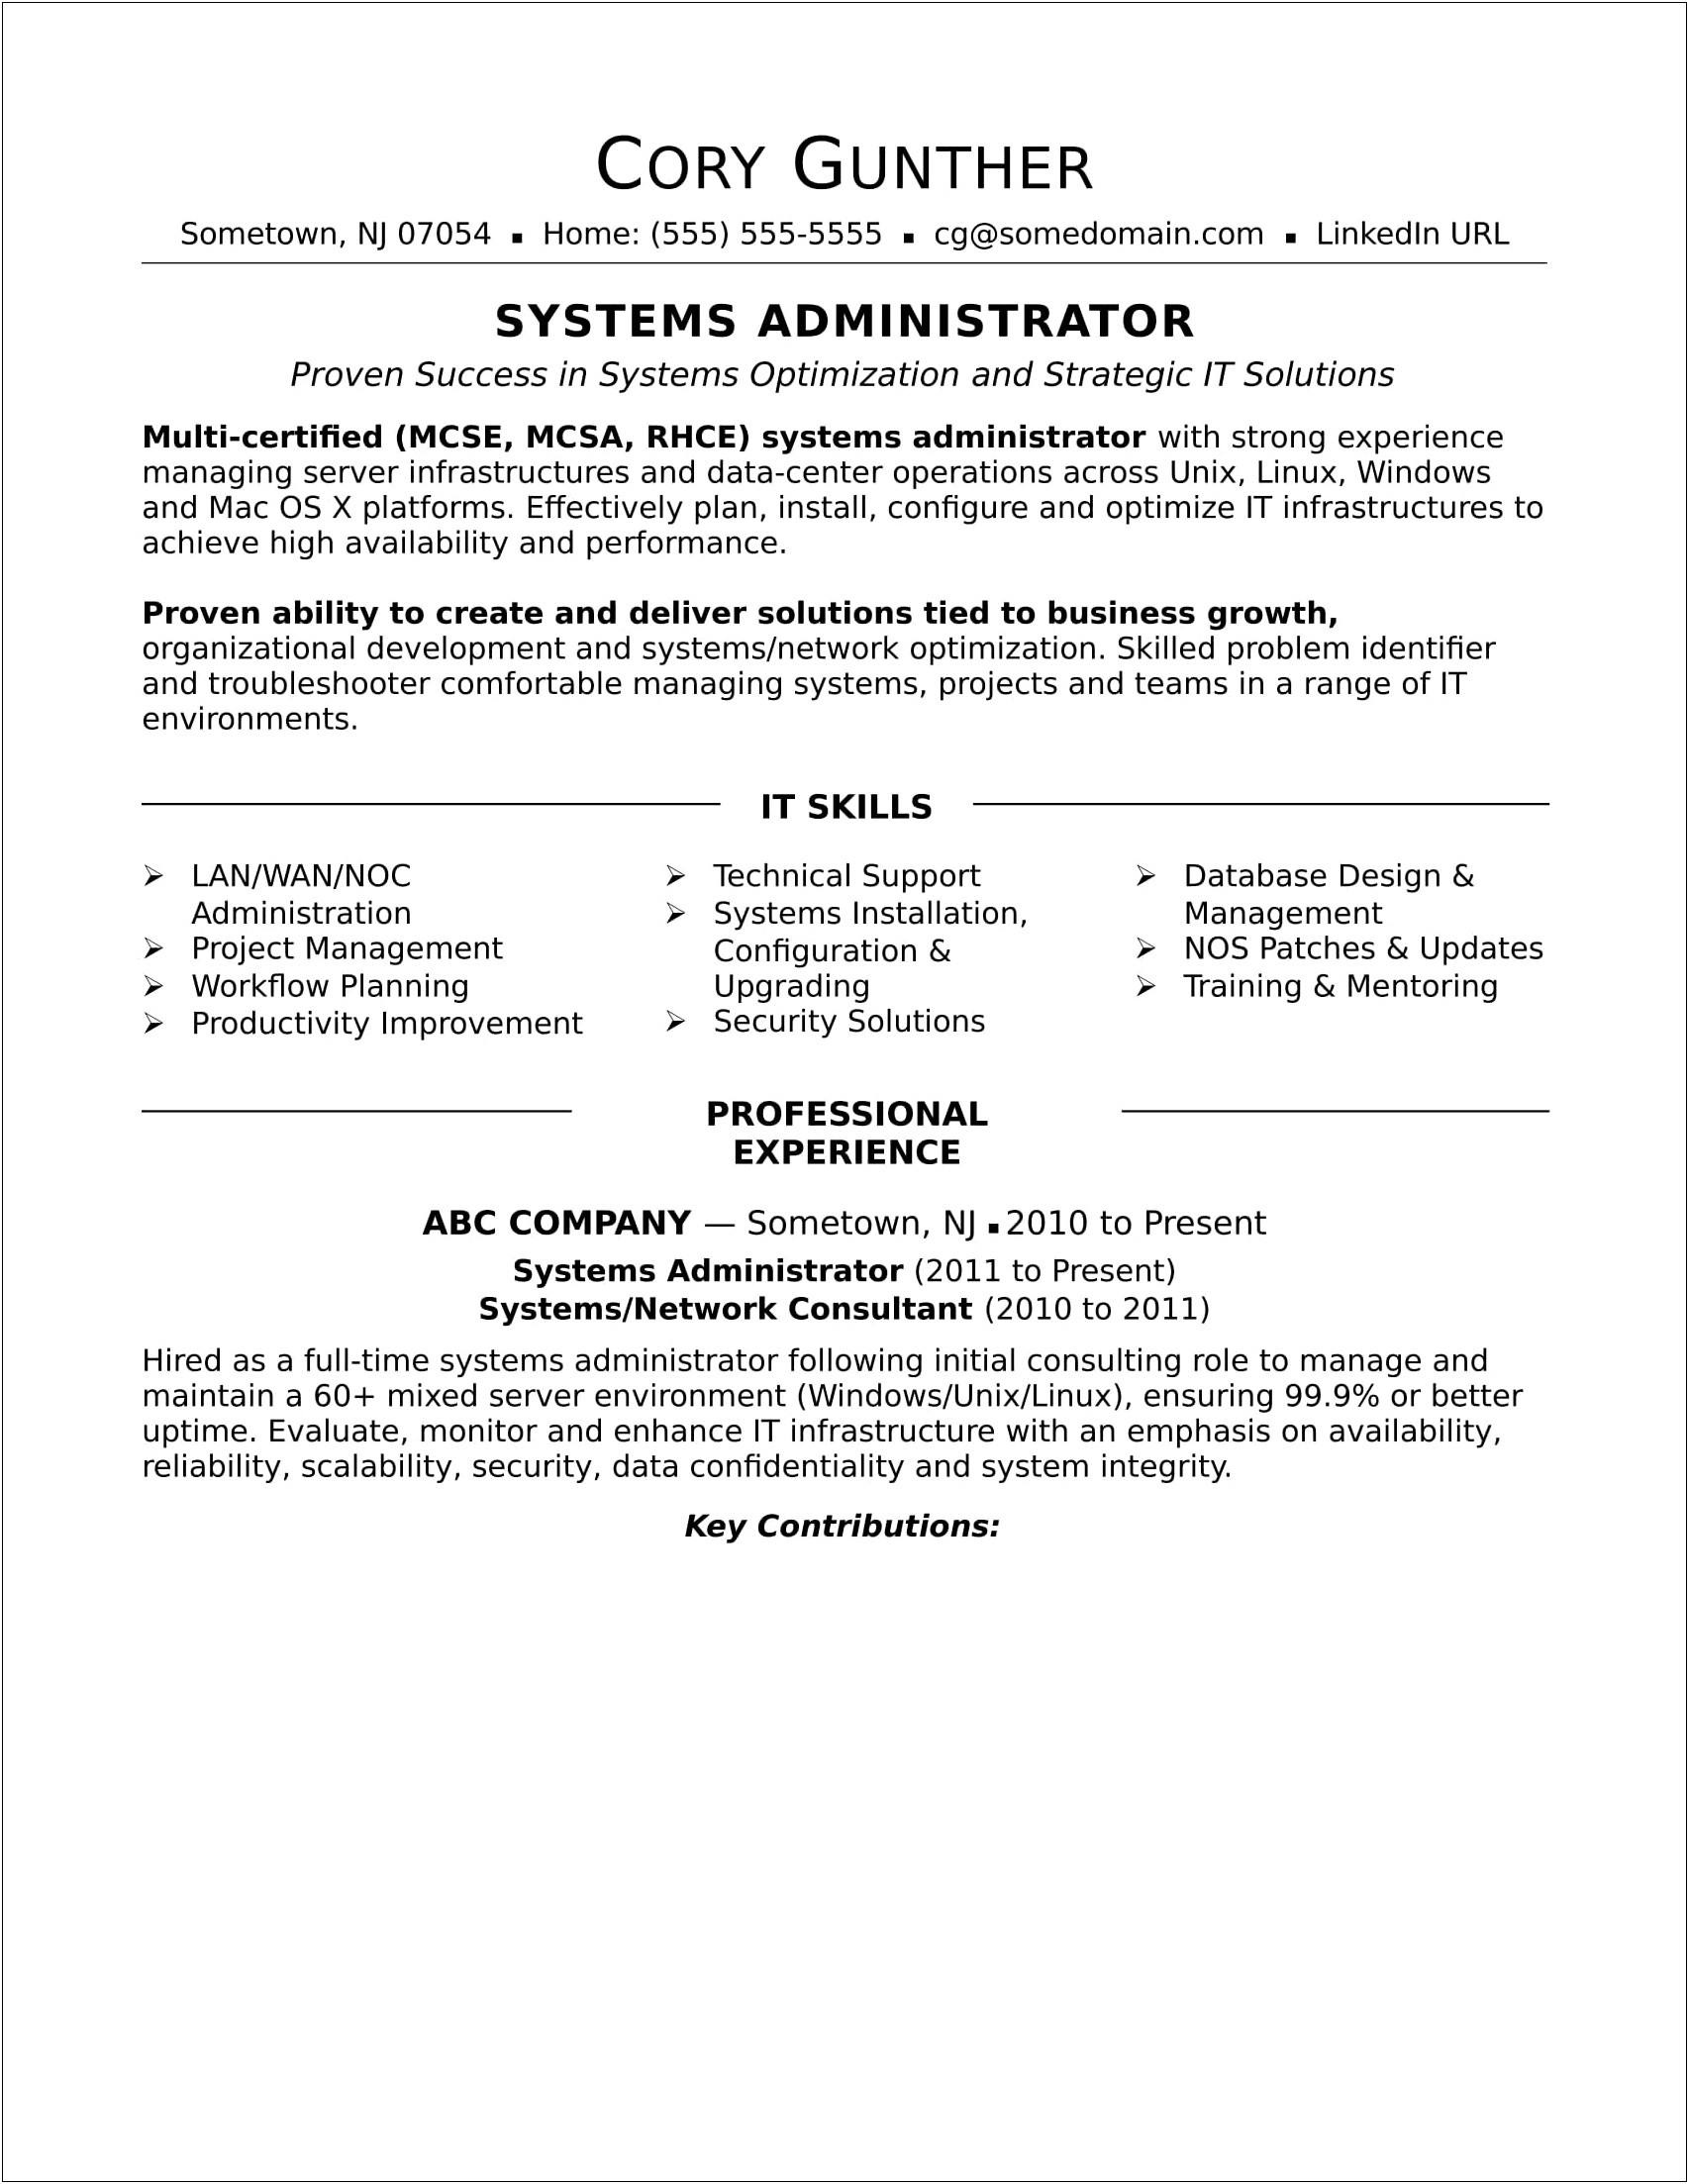 Windows Administrator Resume For 3 Year Experience